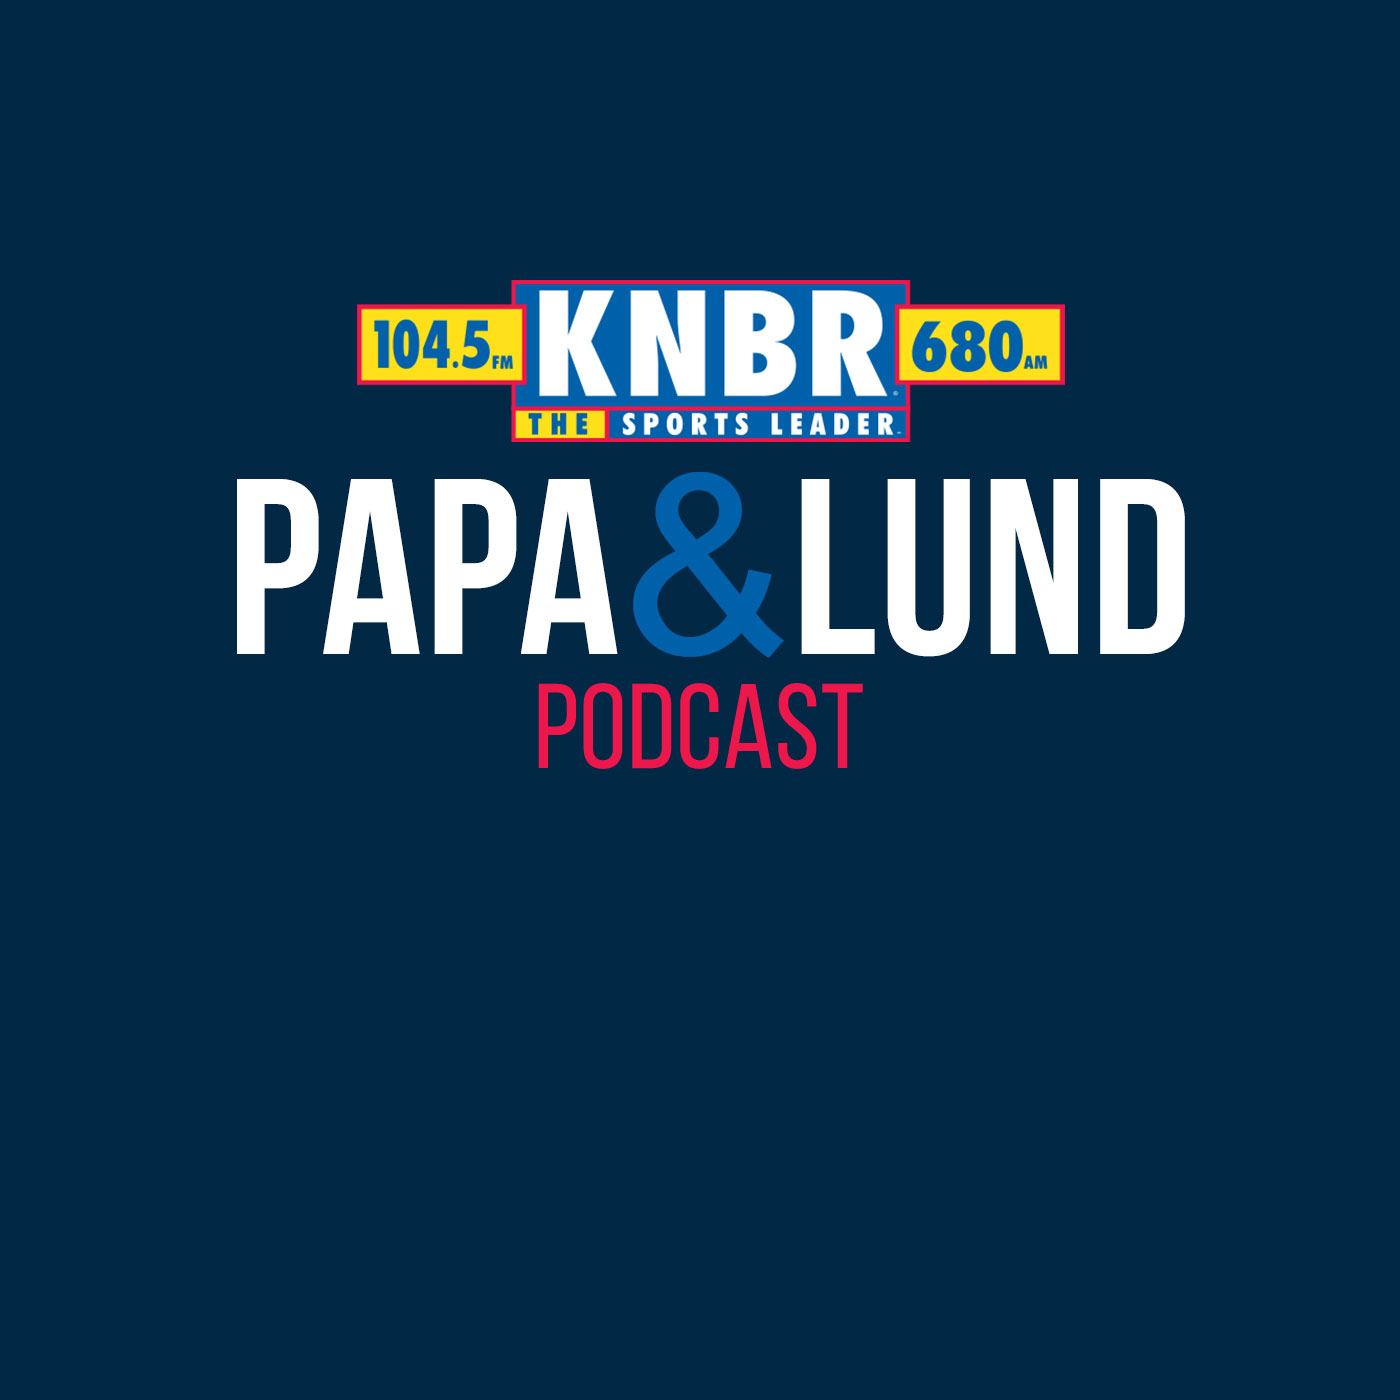 10-2 Greg Papa & John Lund discuss what went wrong with the Giants this season that lead to Gabe Kapler being fired and what needs to change for the Giants to get back to winning